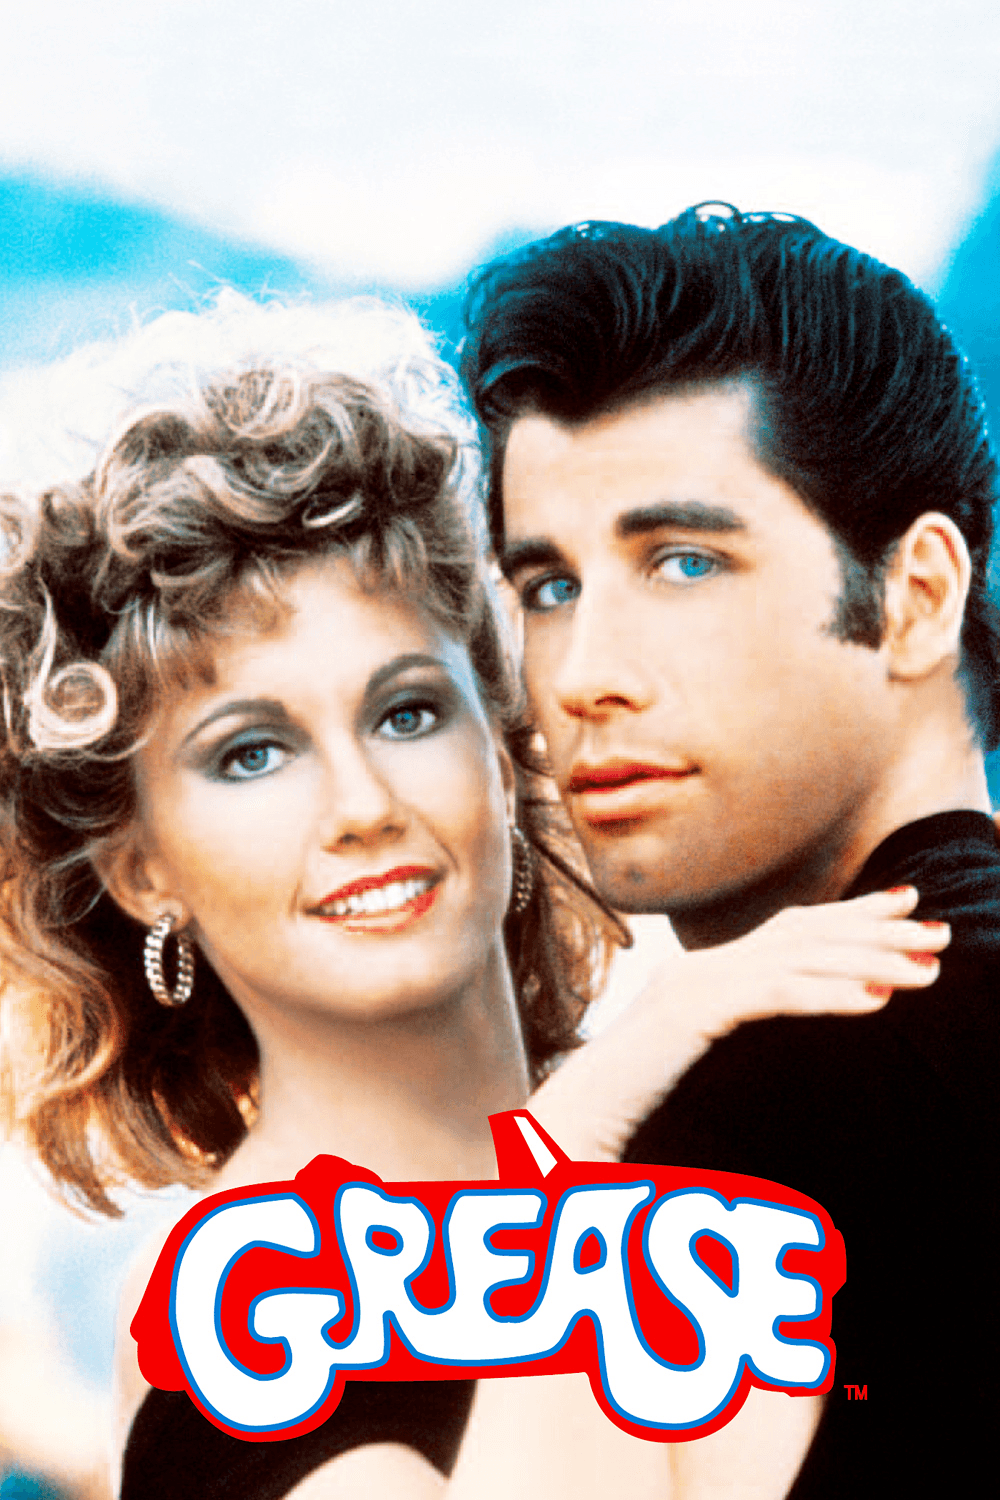 Sing along to the movie Grease